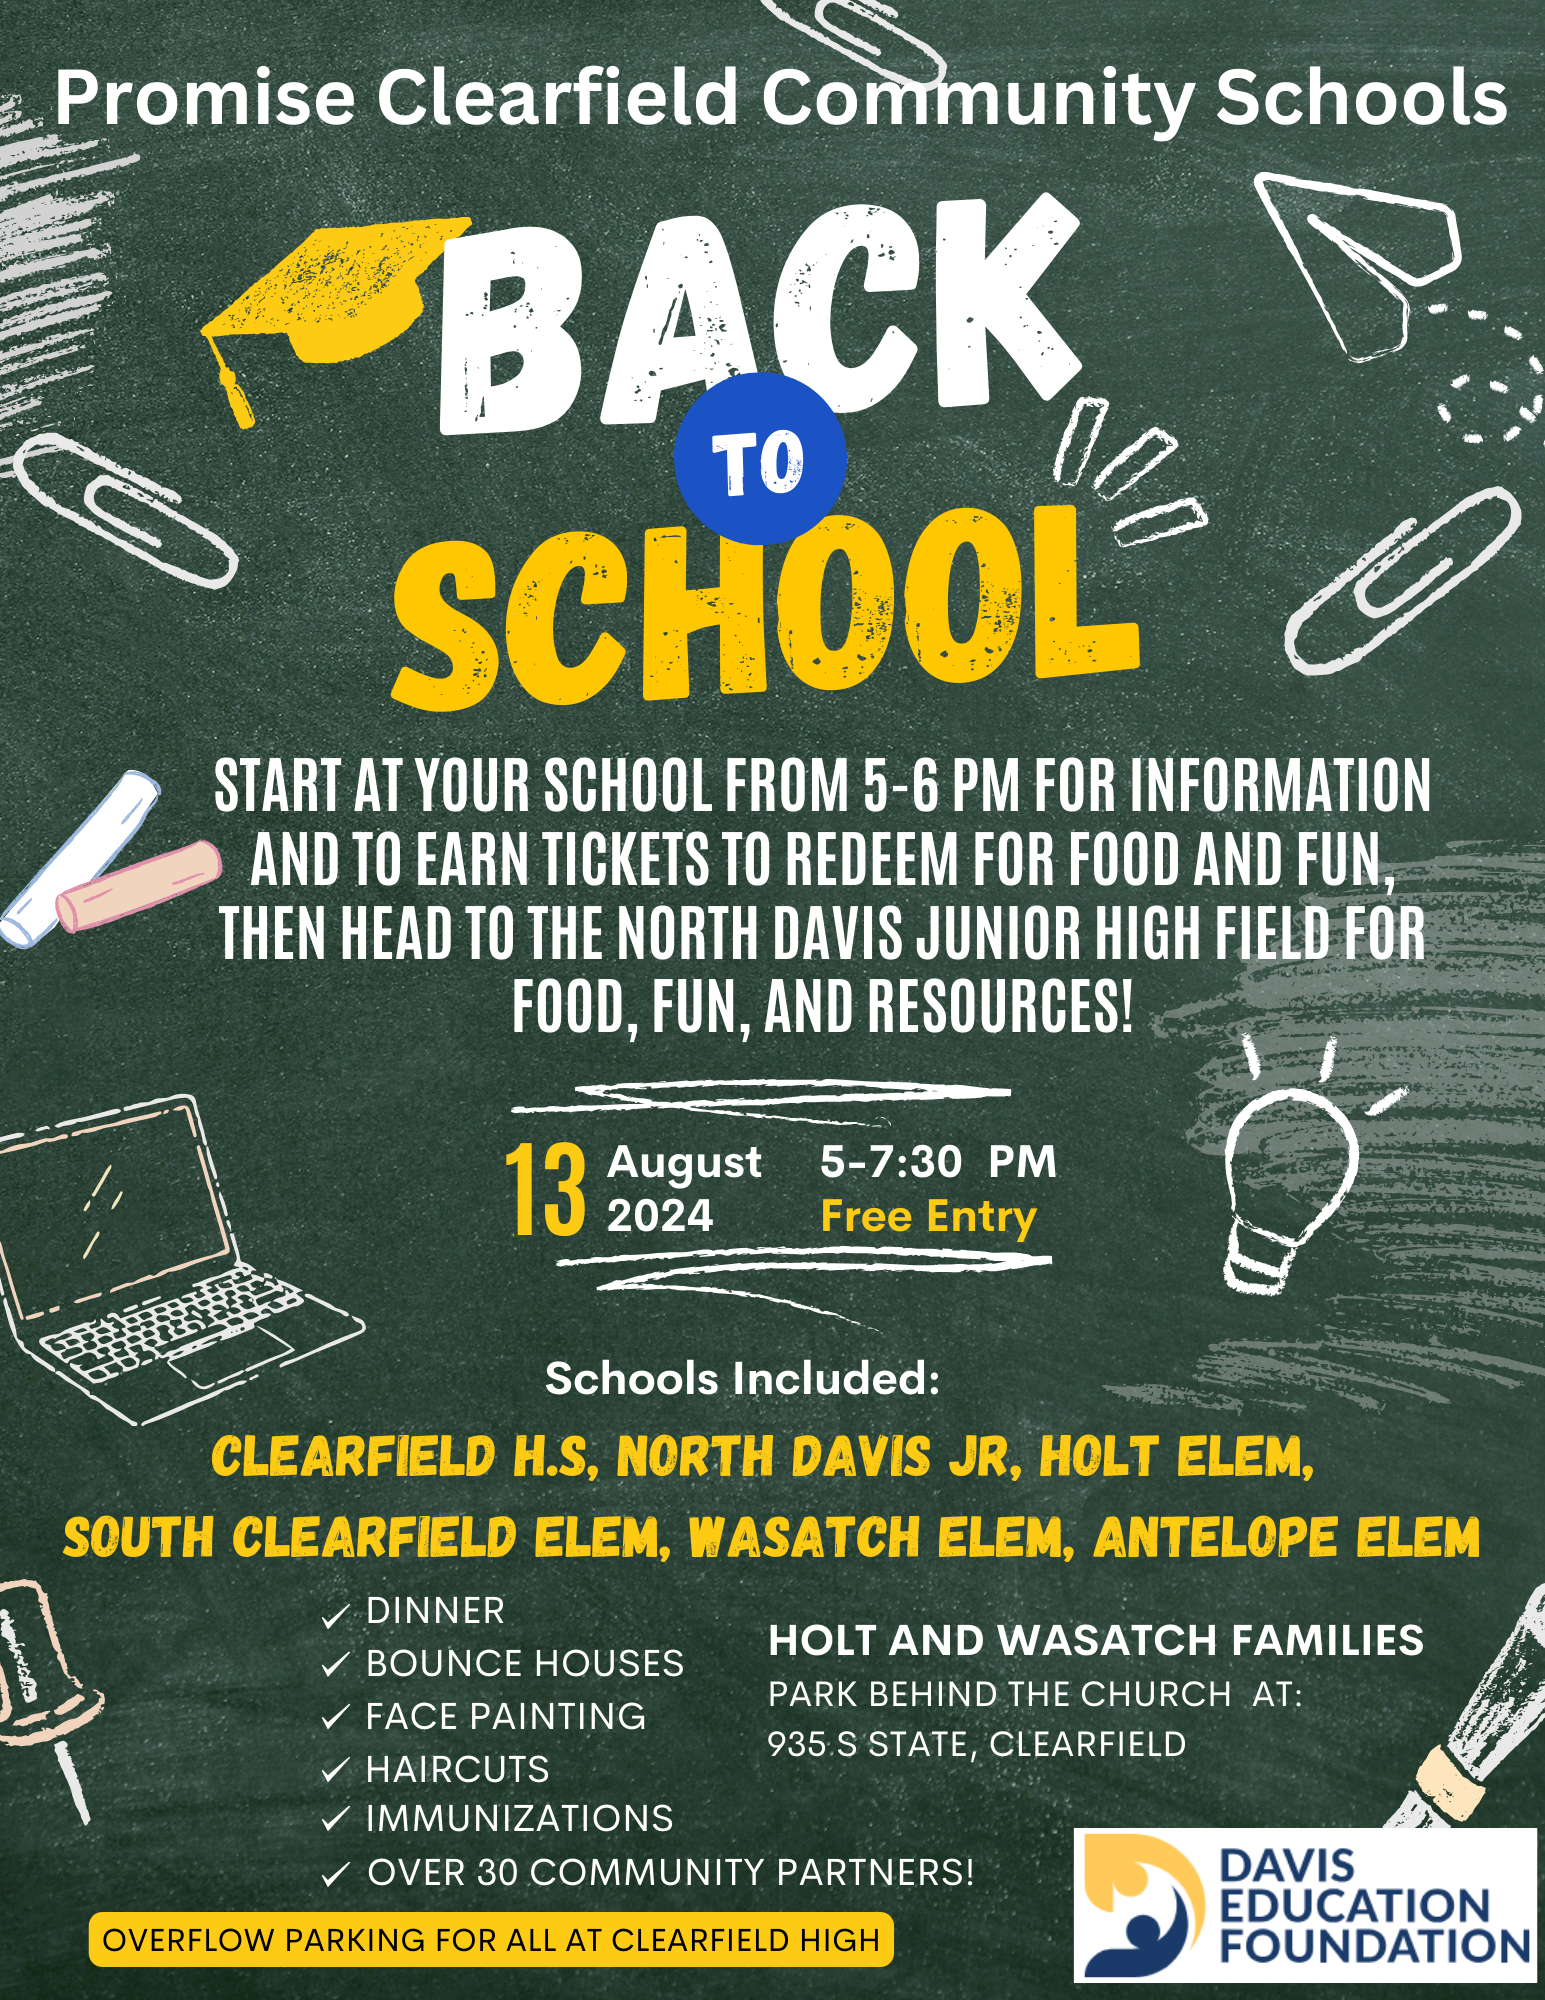 Back to School Event for Parents in Clearfield Area